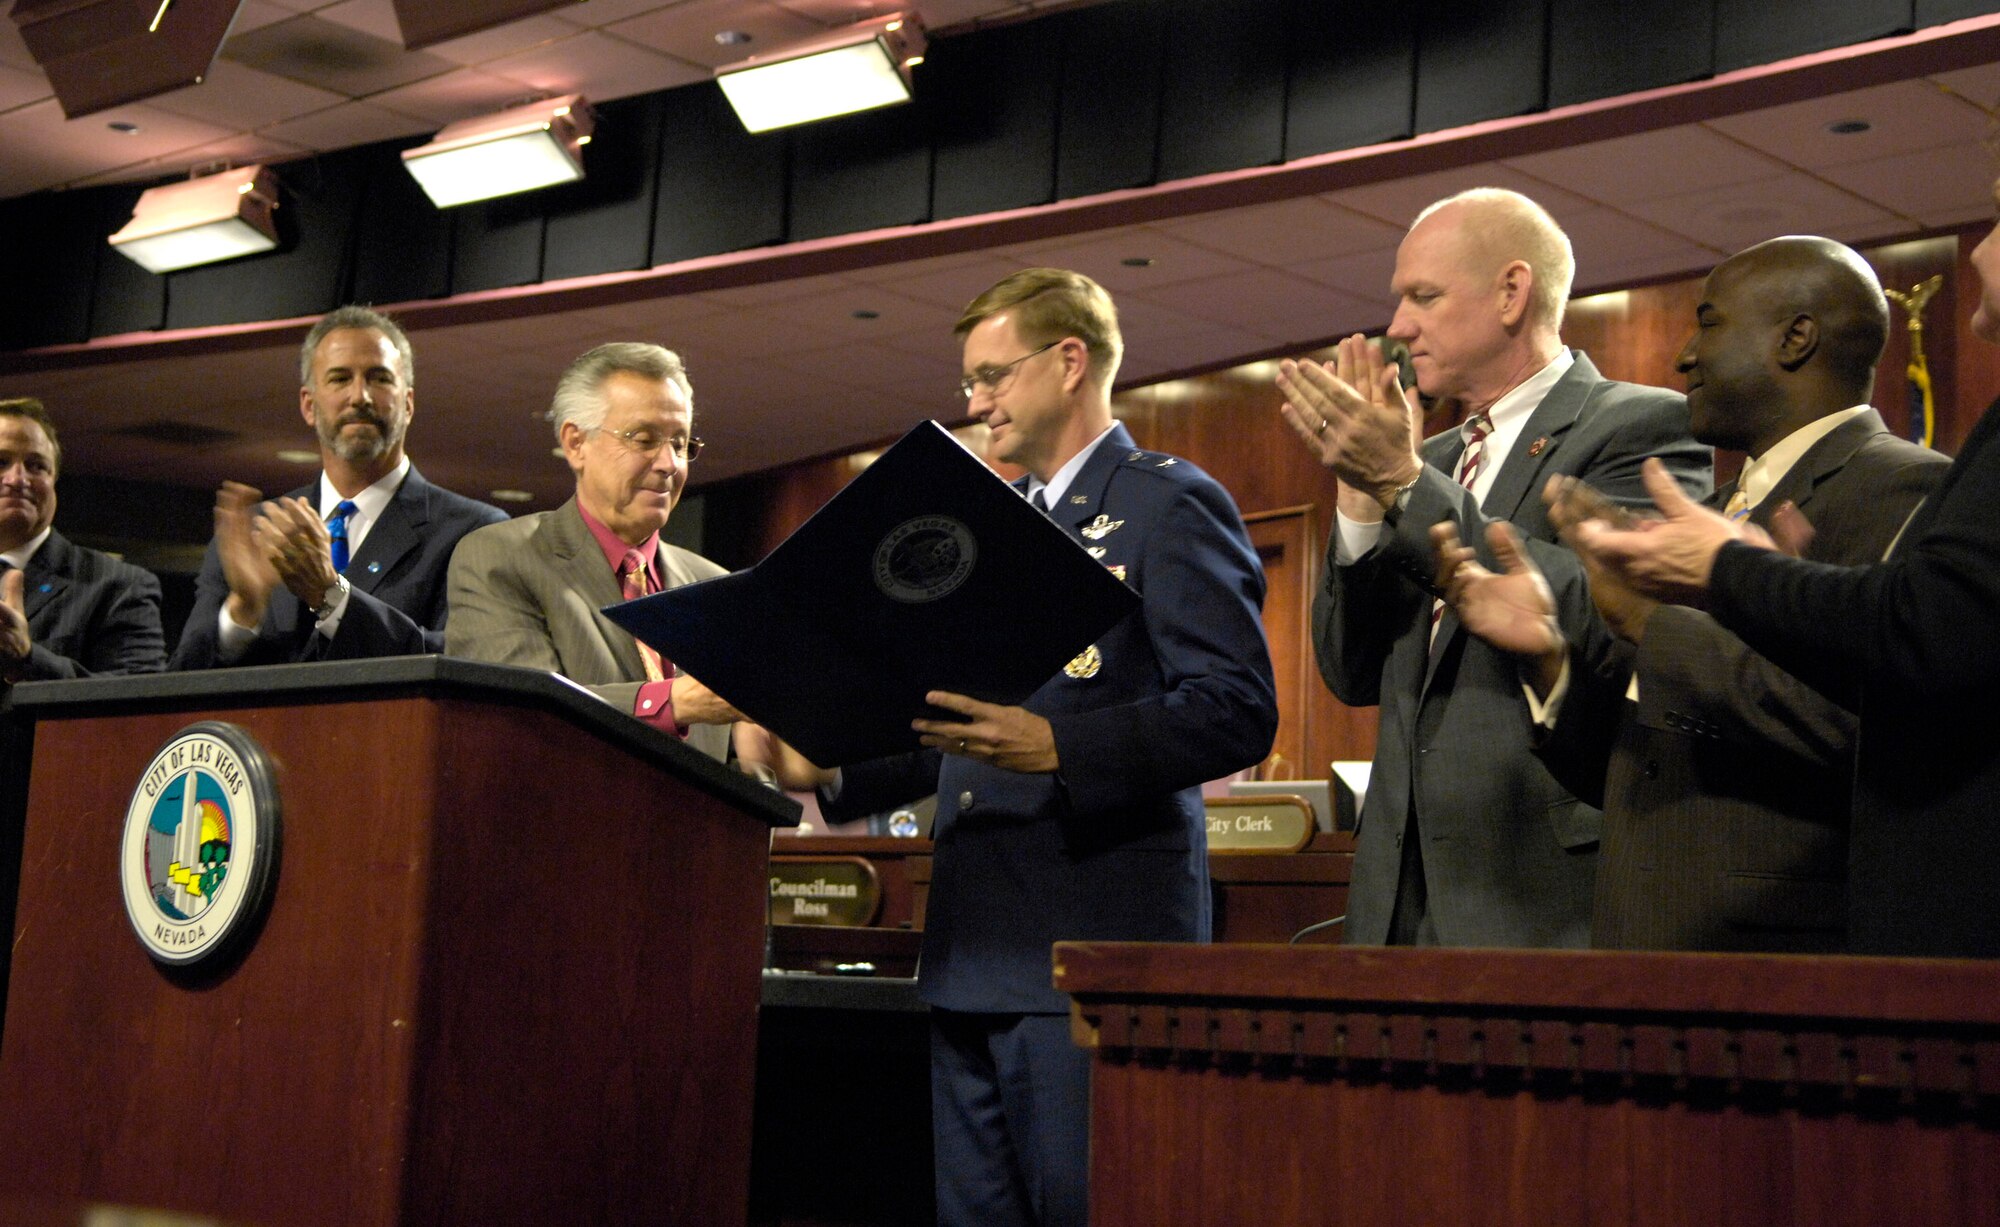 Las Vegas Councilman Gary Reese hands Brig. Gen. Stephen L. Hoog a certificate proclaiming Nov. 5 through 11 as Air Force Week Nov. 8 in Las Vegas. Air Force officials hosted several events to commemorate the occasion culminating in the Nellis Aviation Nation Air Show Nov. 10 and 11. General Hoog is the 57th Wing commander at Nellis Air Force Base, Nev. (U.S. Air Force photo by Staff Sgt. Kenny Kennemer)
